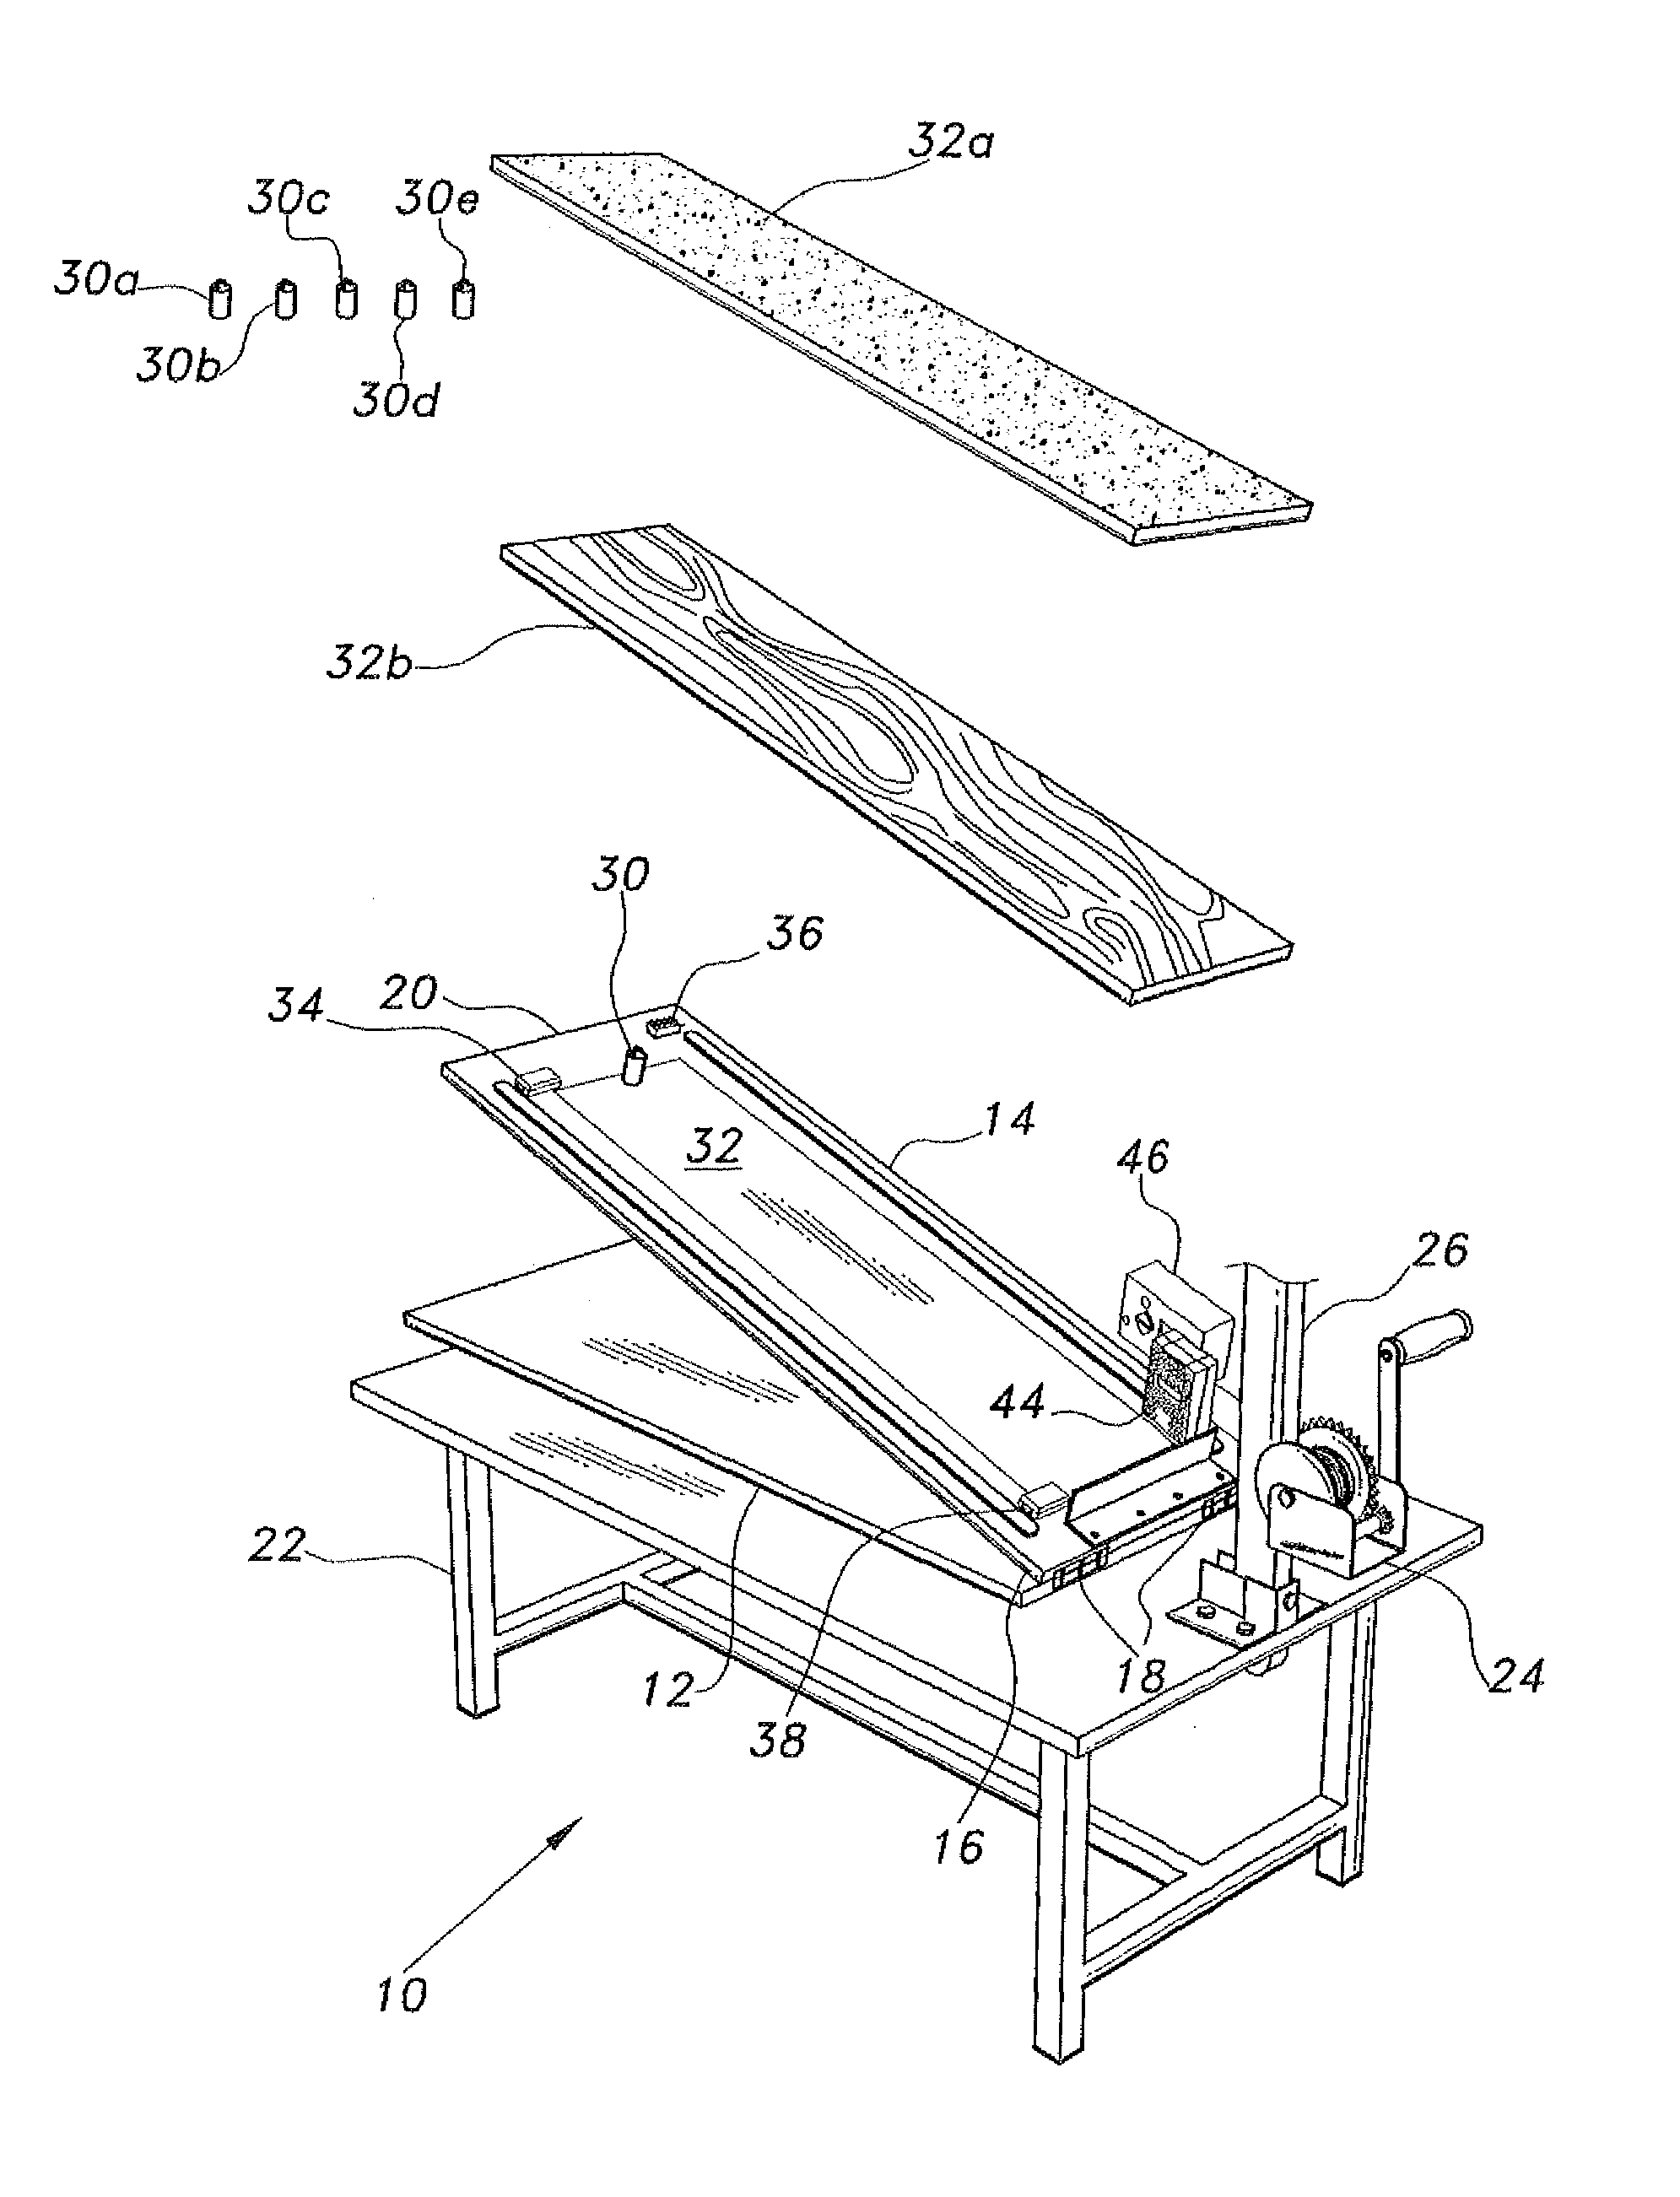 Apparatus for determining coefficients of friction